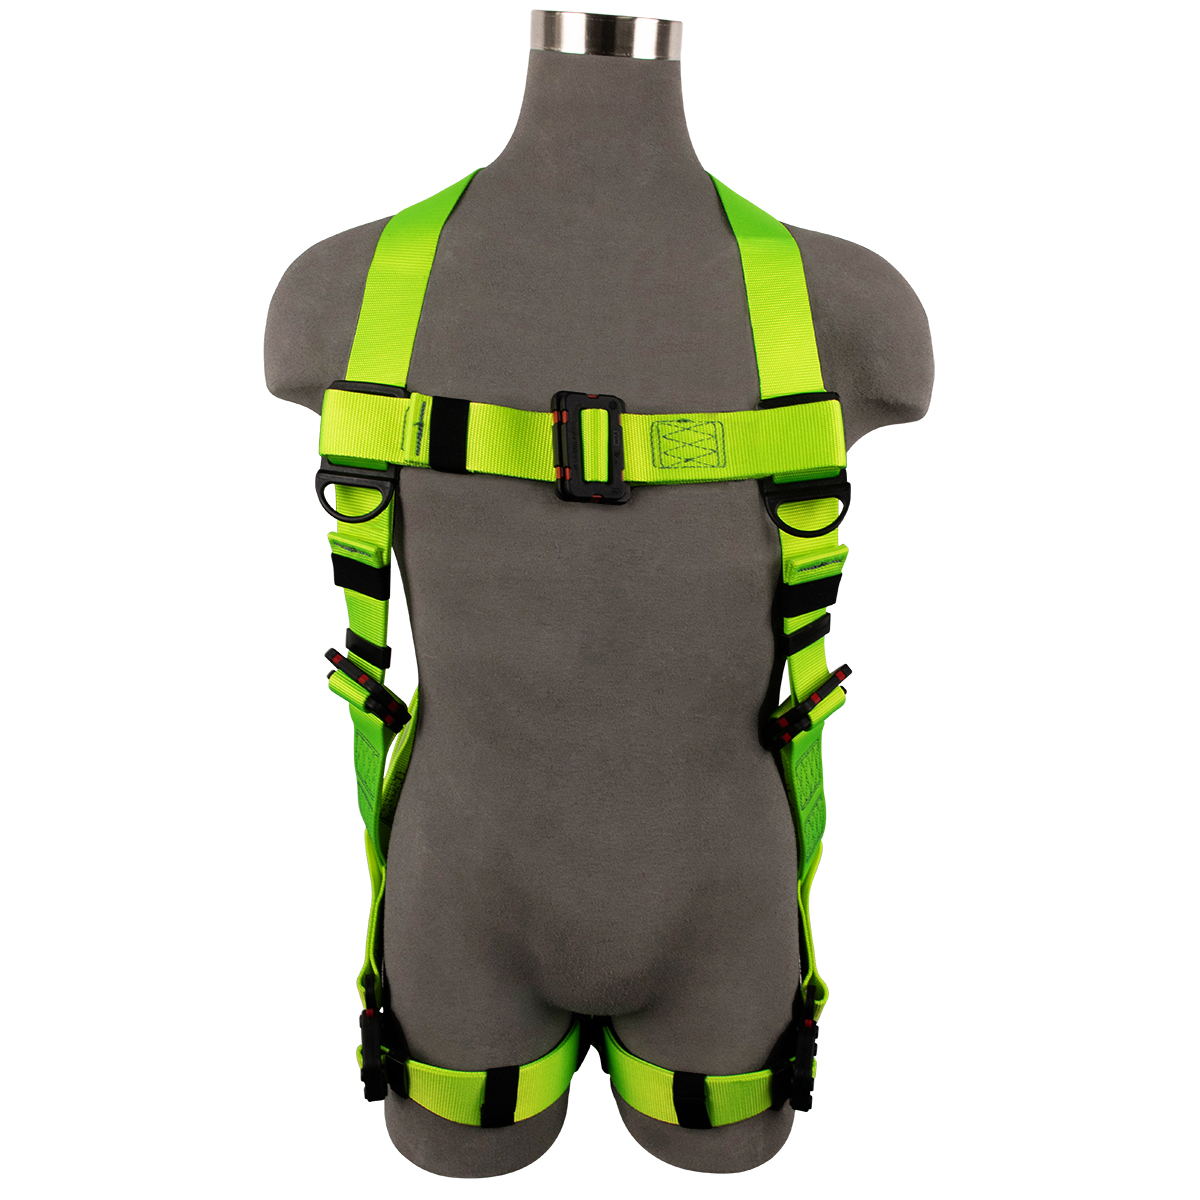 SAFEWAZE PRO+ Arc Flash Dielectric Harness with Pass through Dielectric on Chest and Quick-Connect Legs with Soft Loop Back D-Ring: S/M